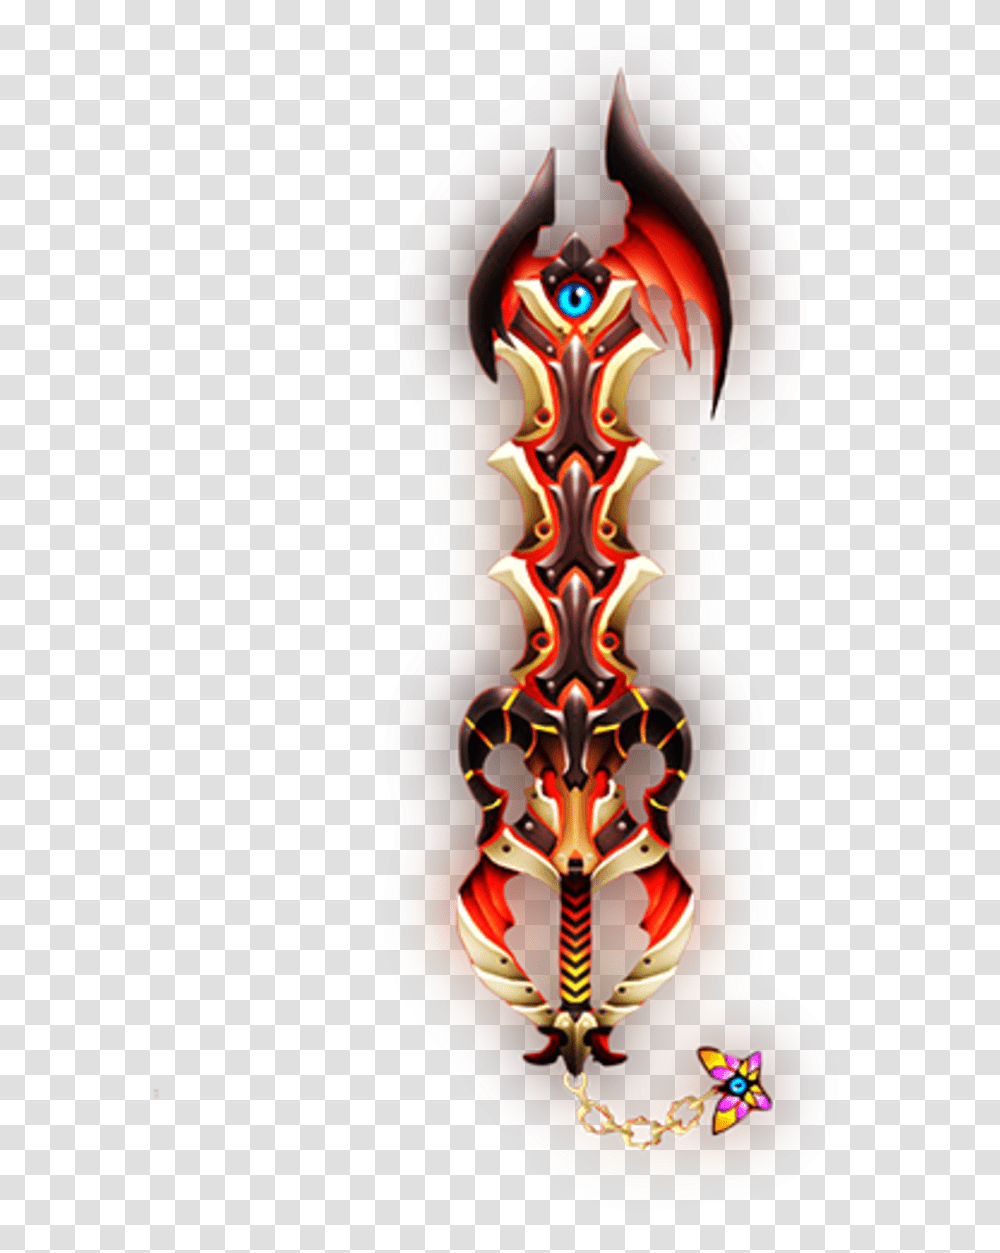 Top 10 Strongest Keyblades In Kingdom Hearts Levelskip Kh Ddd End Of Pain, Architecture, Building, Weapon, Weaponry Transparent Png